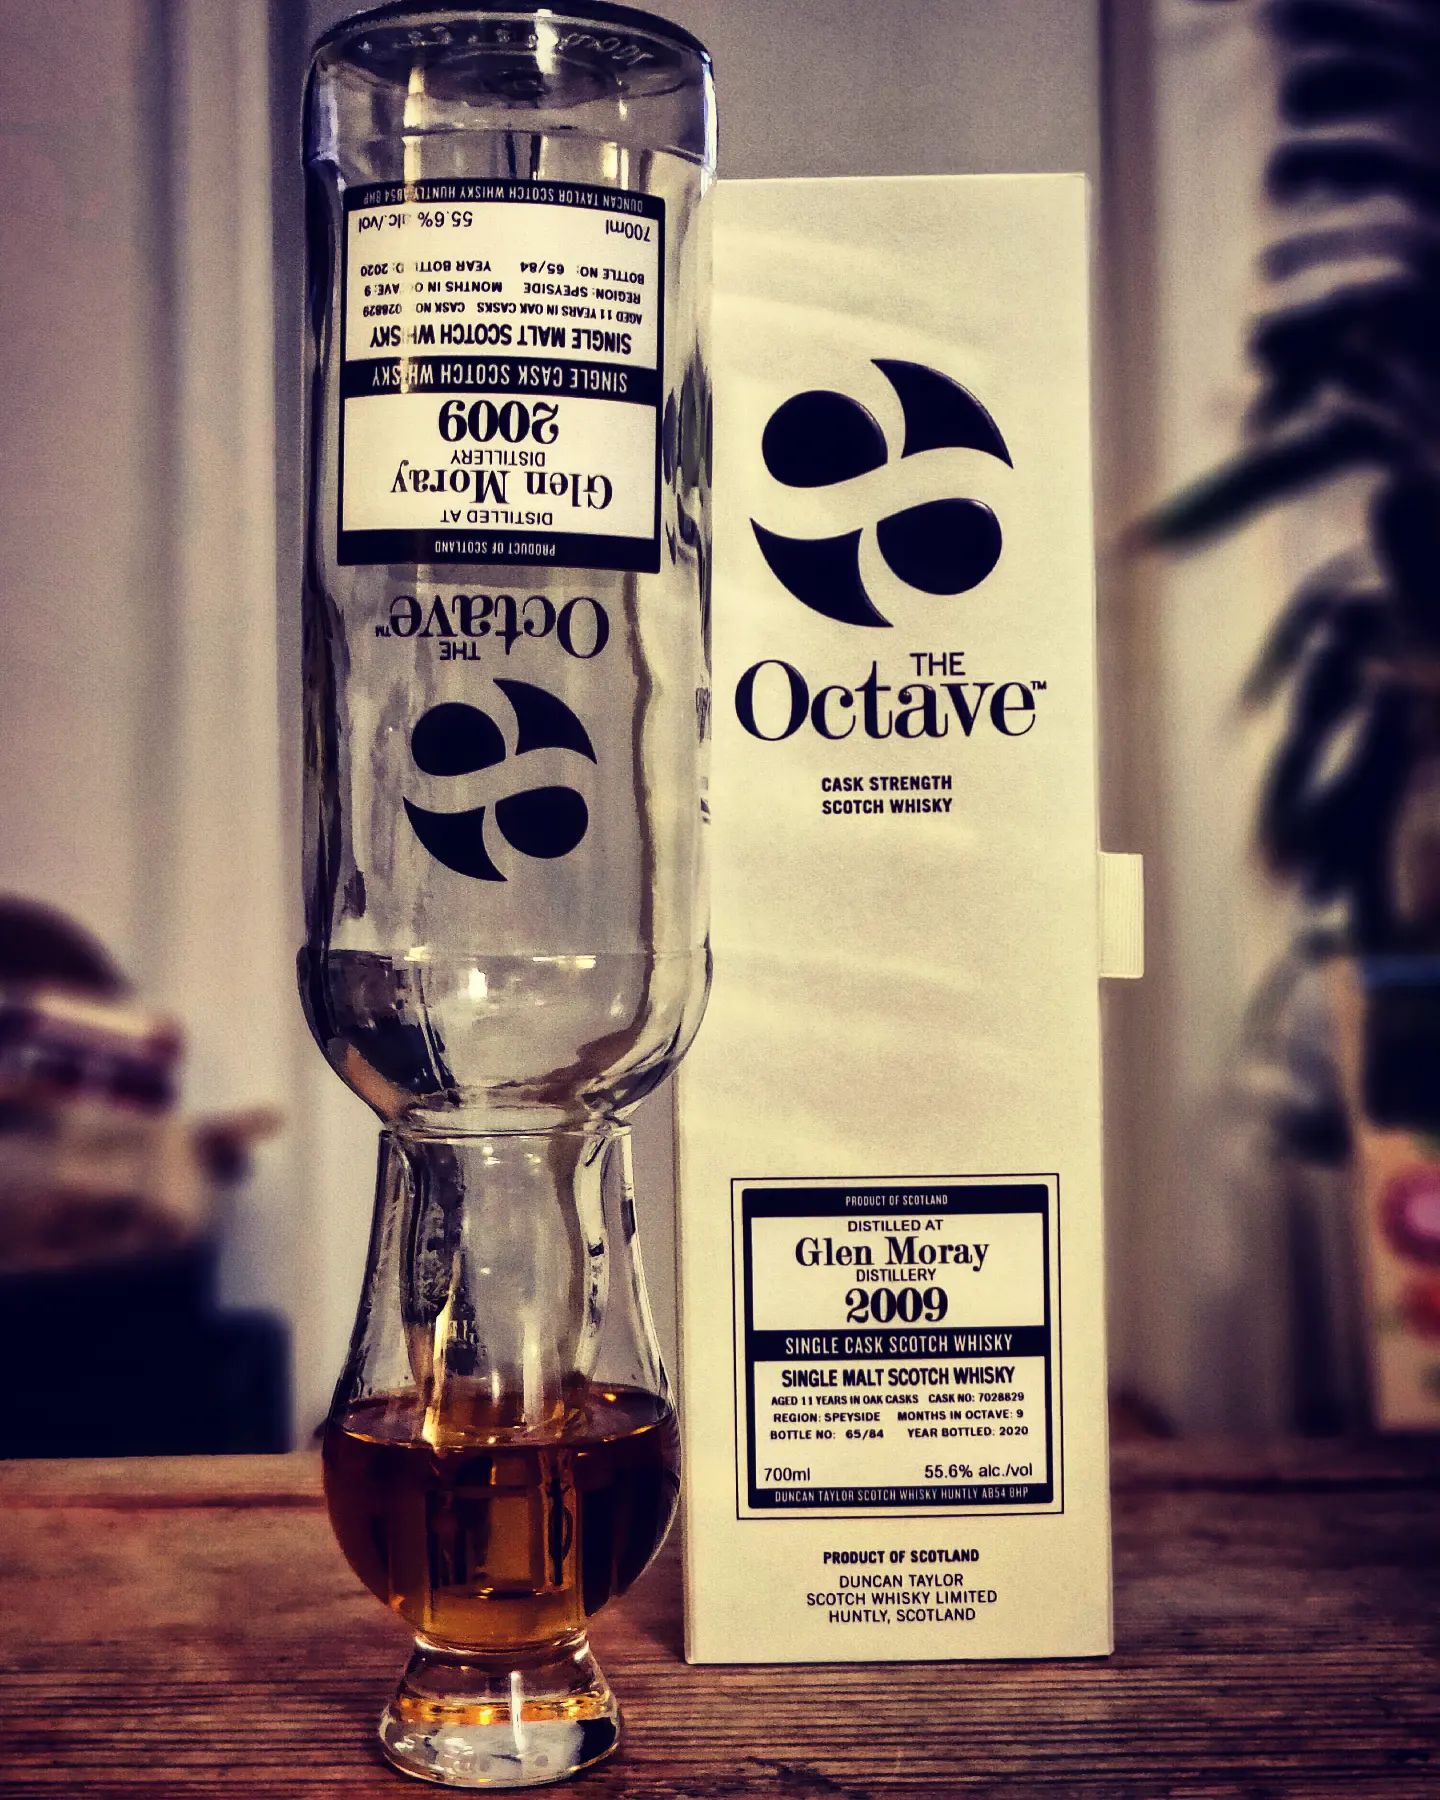 TASTING NOTES ! GLEN MORAY DUNCAN TAYLOR OCTAVE

[unpaid ad]

Hi folks, any Glen Moray fans present? I have yet another #bottlekill to present,
and it's a whisky I will definitely miss sipping...

@glen_moray_whisky @duncantaylorscotchwhisky Octave 2009 11yo (cask no. 7028829; bottle 65/84; 55.6% ABV)

👃
Dry wood and sherry, somehow oldschool, rich and sweet, dried prunes, raisins, walnuts and roasted cocoa beans.

👅
Rich and fruity, dry with tannins, a superb sweetness with wood and red berries, dried figs and raisins.

🏁
Dark toffee, dry and creamy with rich fruitiness, sherry sweetness and tannins, dried figs, raisins and  malty starch.

Frankly, such a wonderful oldschool taste, perfectly bound in alcohol and lovely dry tannins - a hugely rich and rewarding dram to sip. If you can get your hands on a bottle, I recommend you take two!

How do you think about Octaves - short and intense sherry finishes? Let me know in the comments and meanwhile, enjoy your dramming! 🥃

#scotch #singlemalt #whiskytasting #whiskyporn #whiskygram #whiskey #duncantaylor #octave #sherry #glenmoray #lostanddramed #hofinbayernganzoben #mcwulf #picoftheday #oldschool #tannins #whiskymania #whiskylover #whiskyexperience #whiskylife #whiskylove #whiskybar #speyside #speysidewhisky #morayspeyside #singlecask #limited #instadram #instawhisky